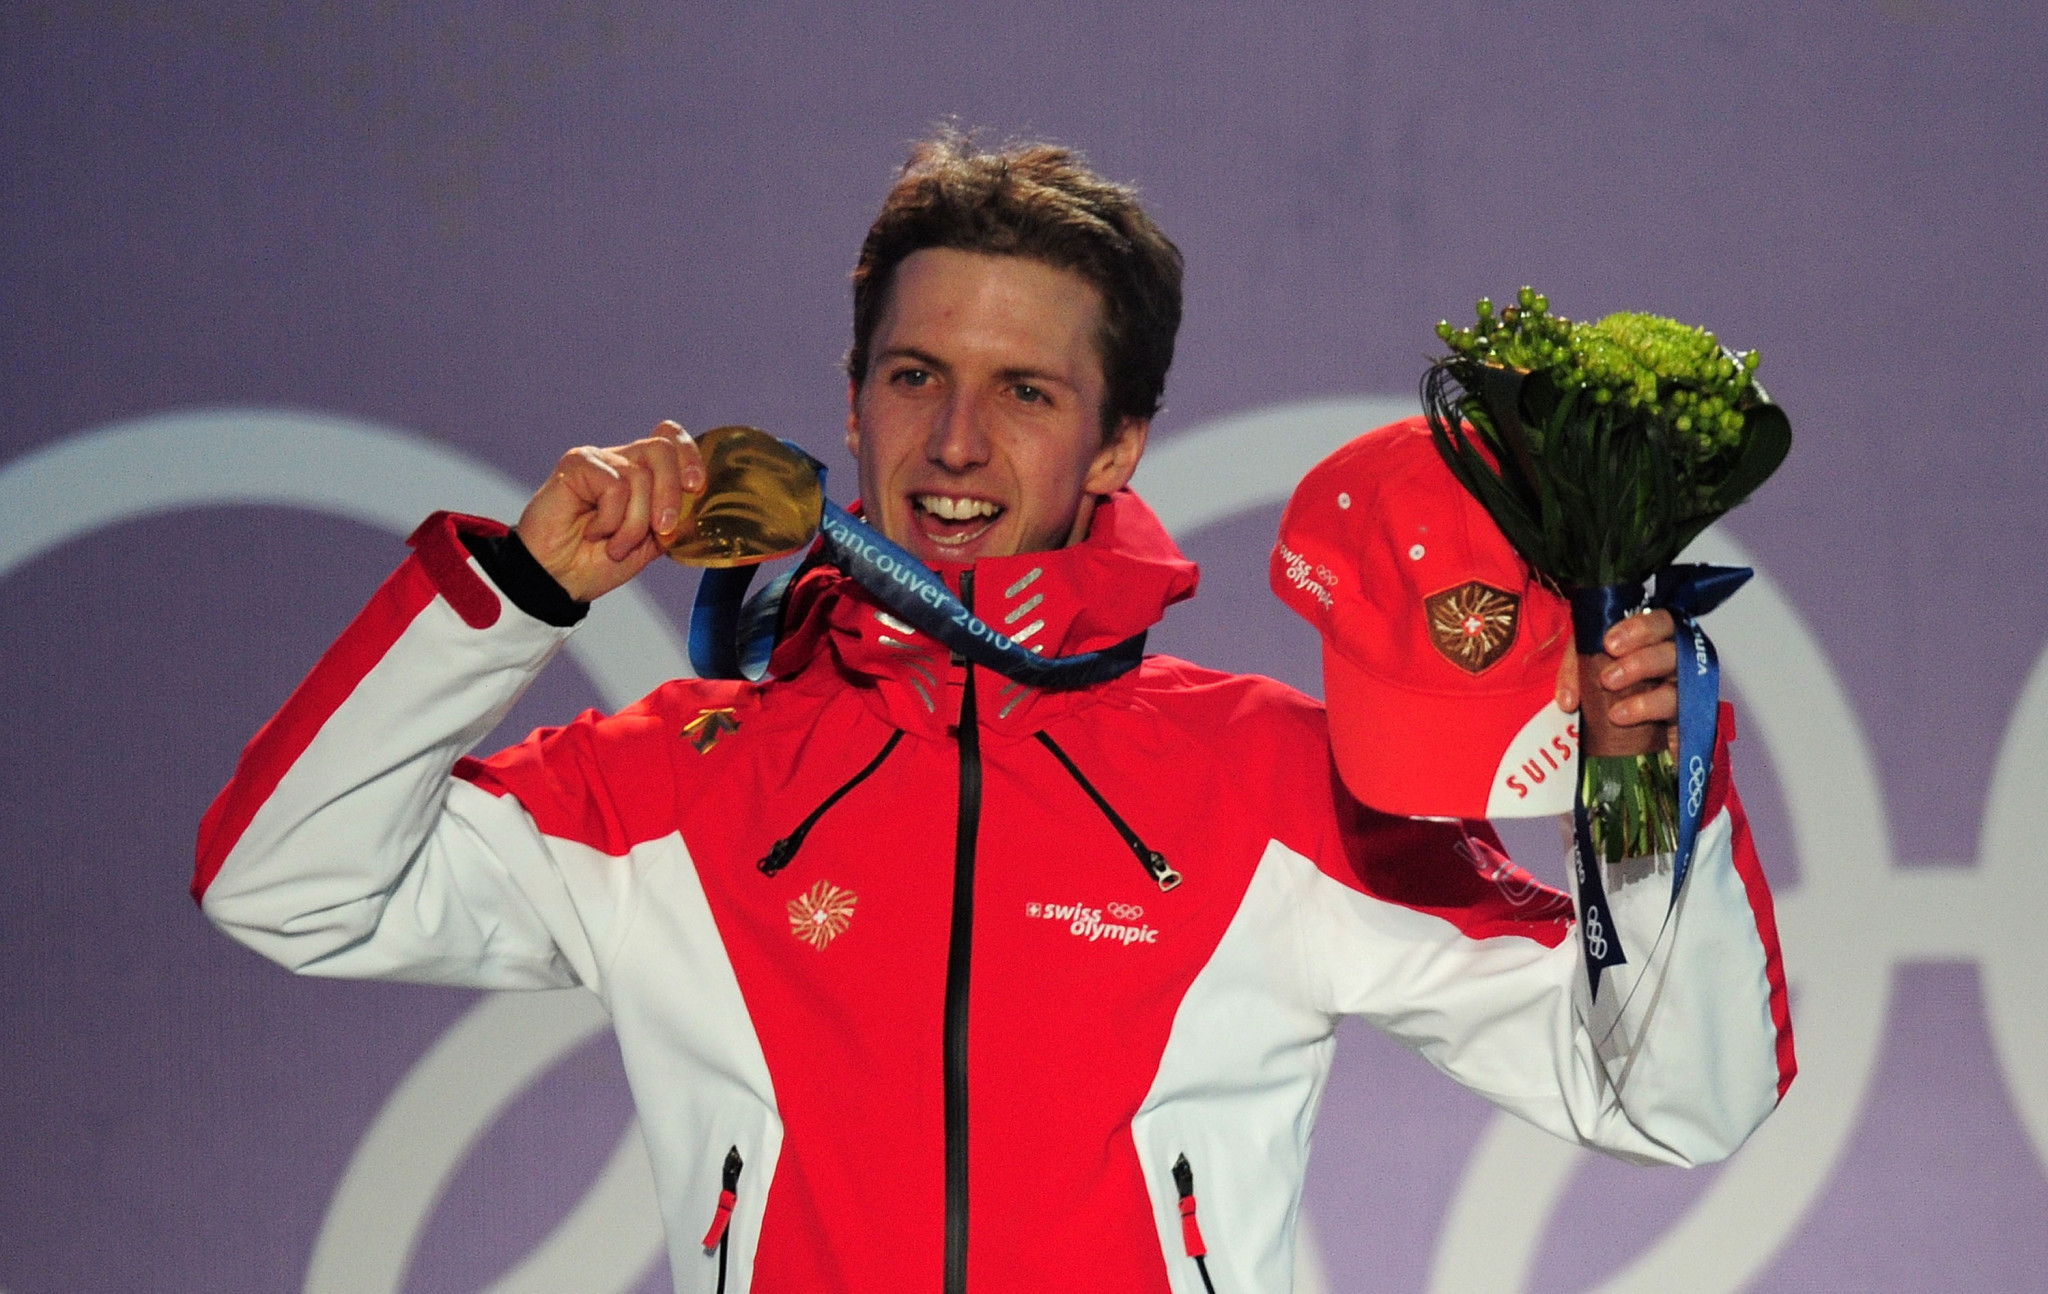 Simon Ammann won two gold medals at Vancouver 2010 ©Getty Images